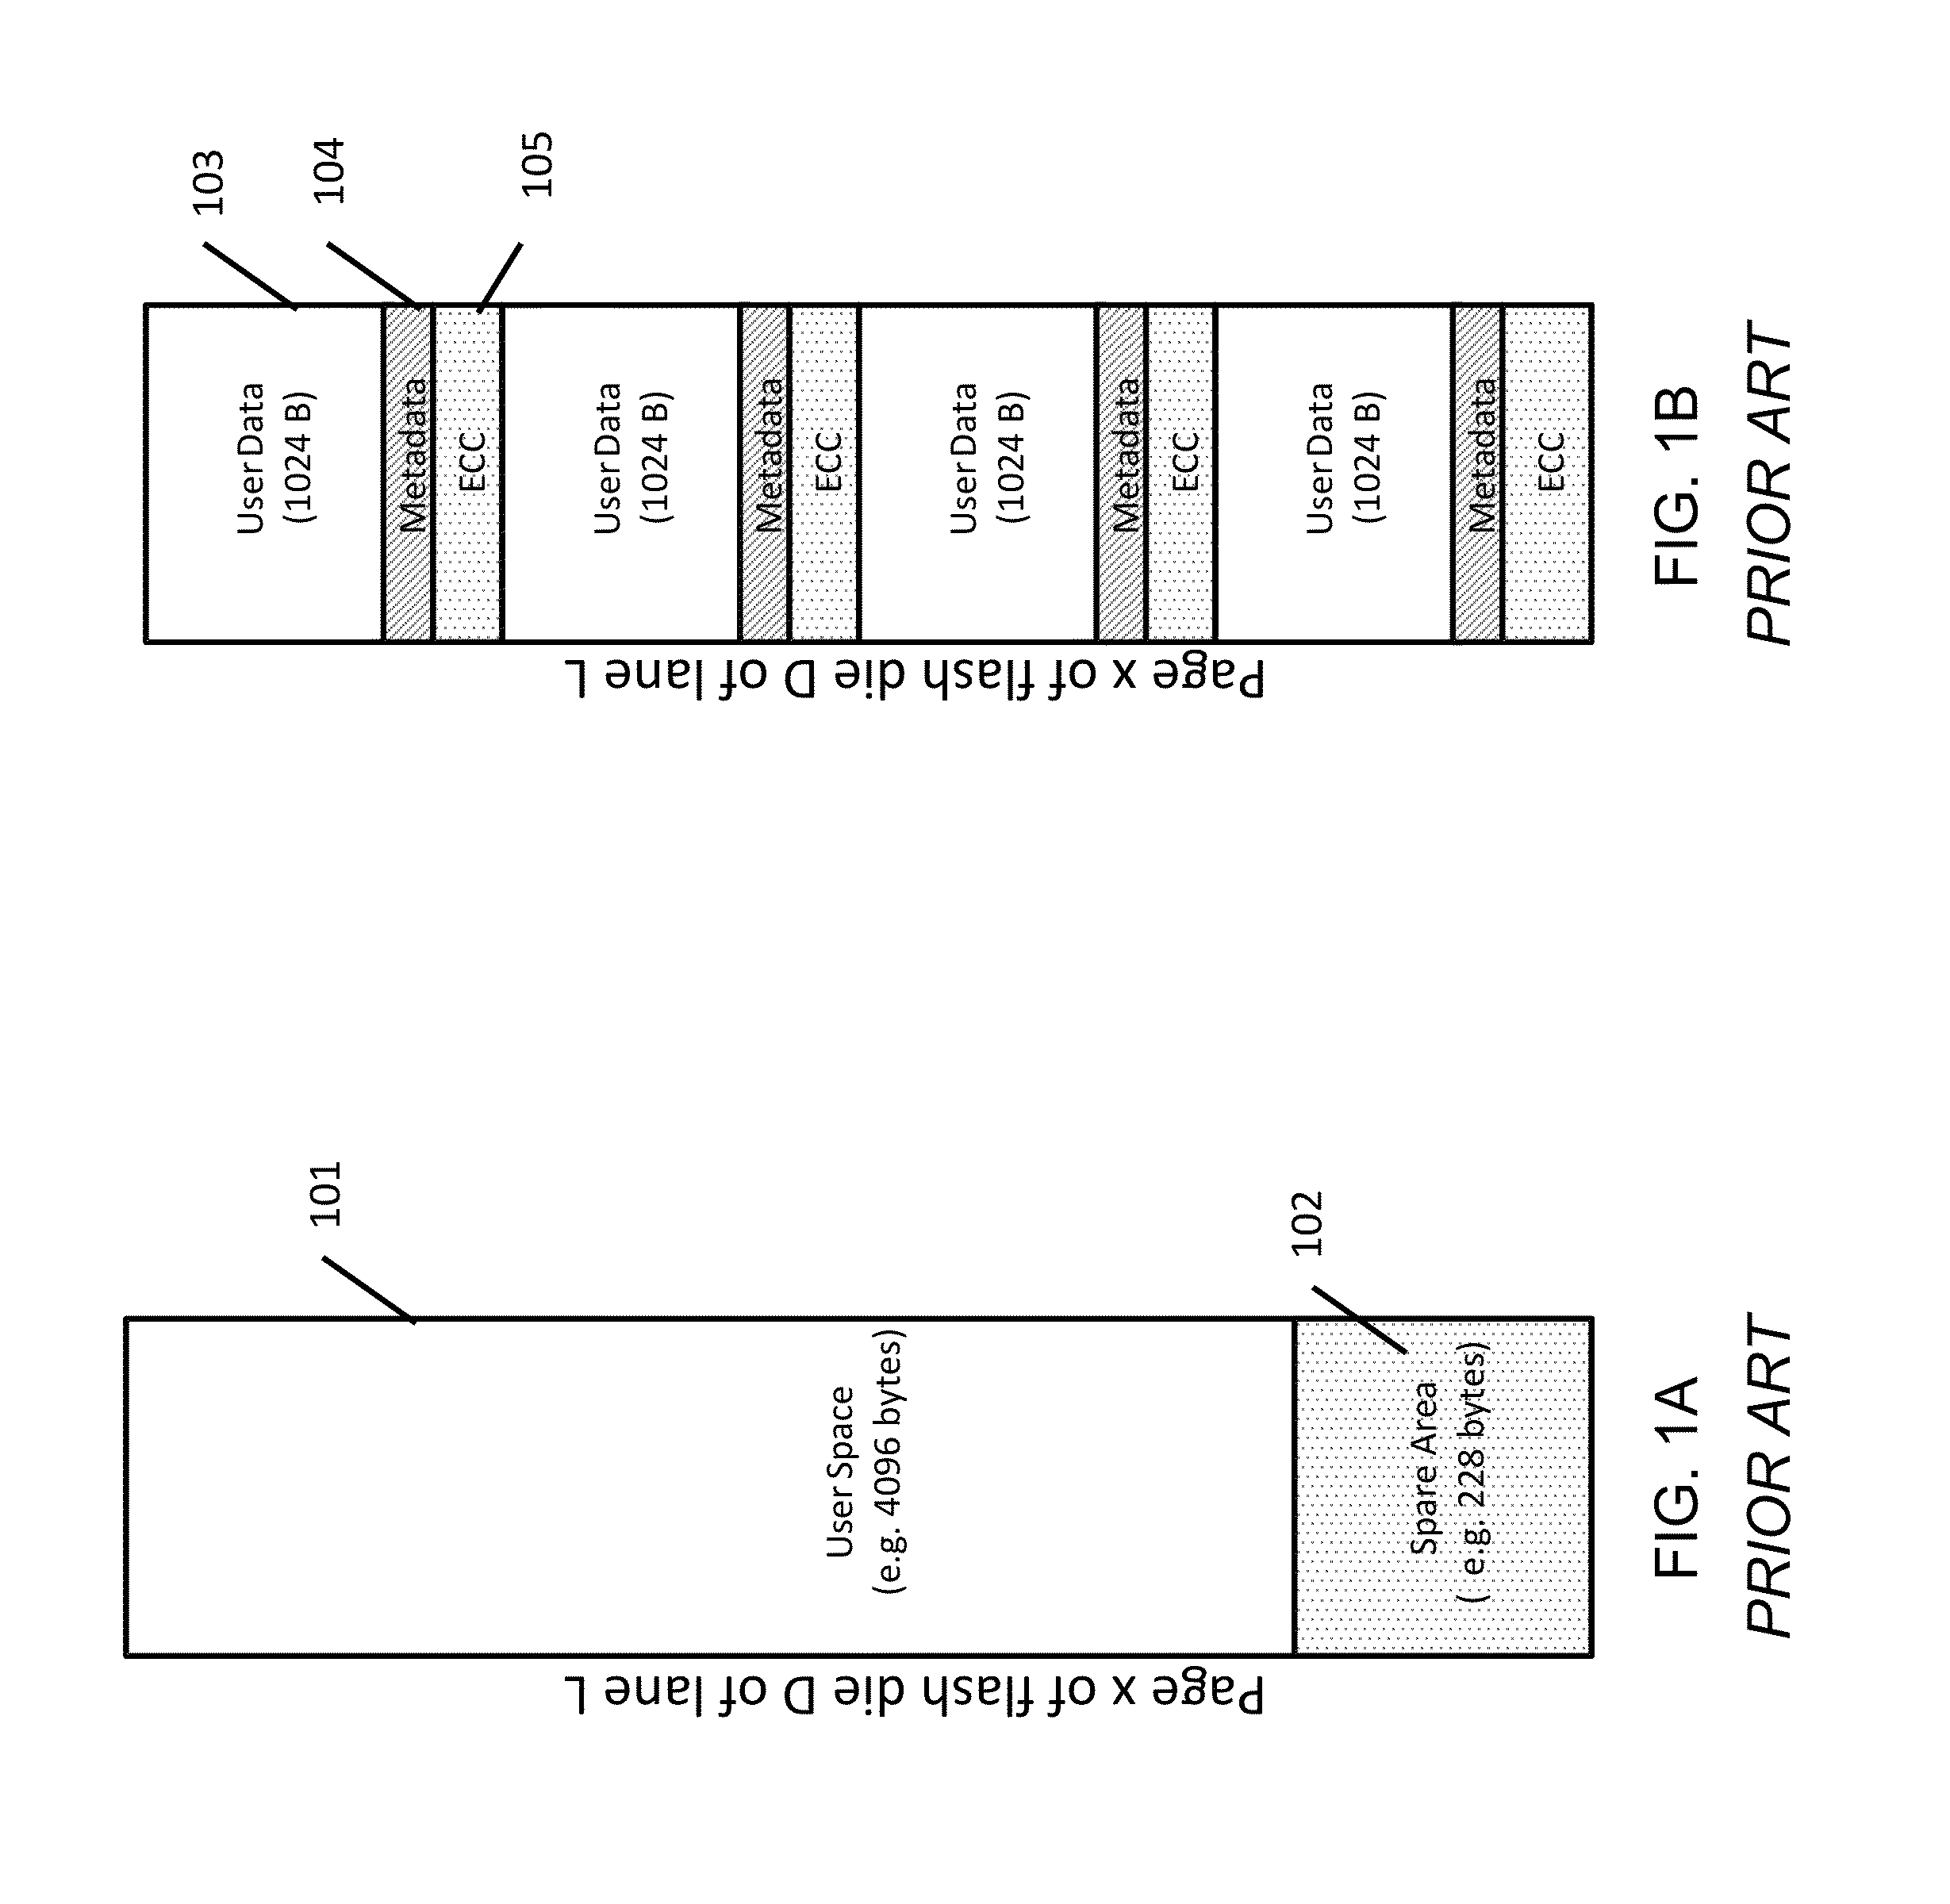 Systems and methods for mapping for solid-state memory